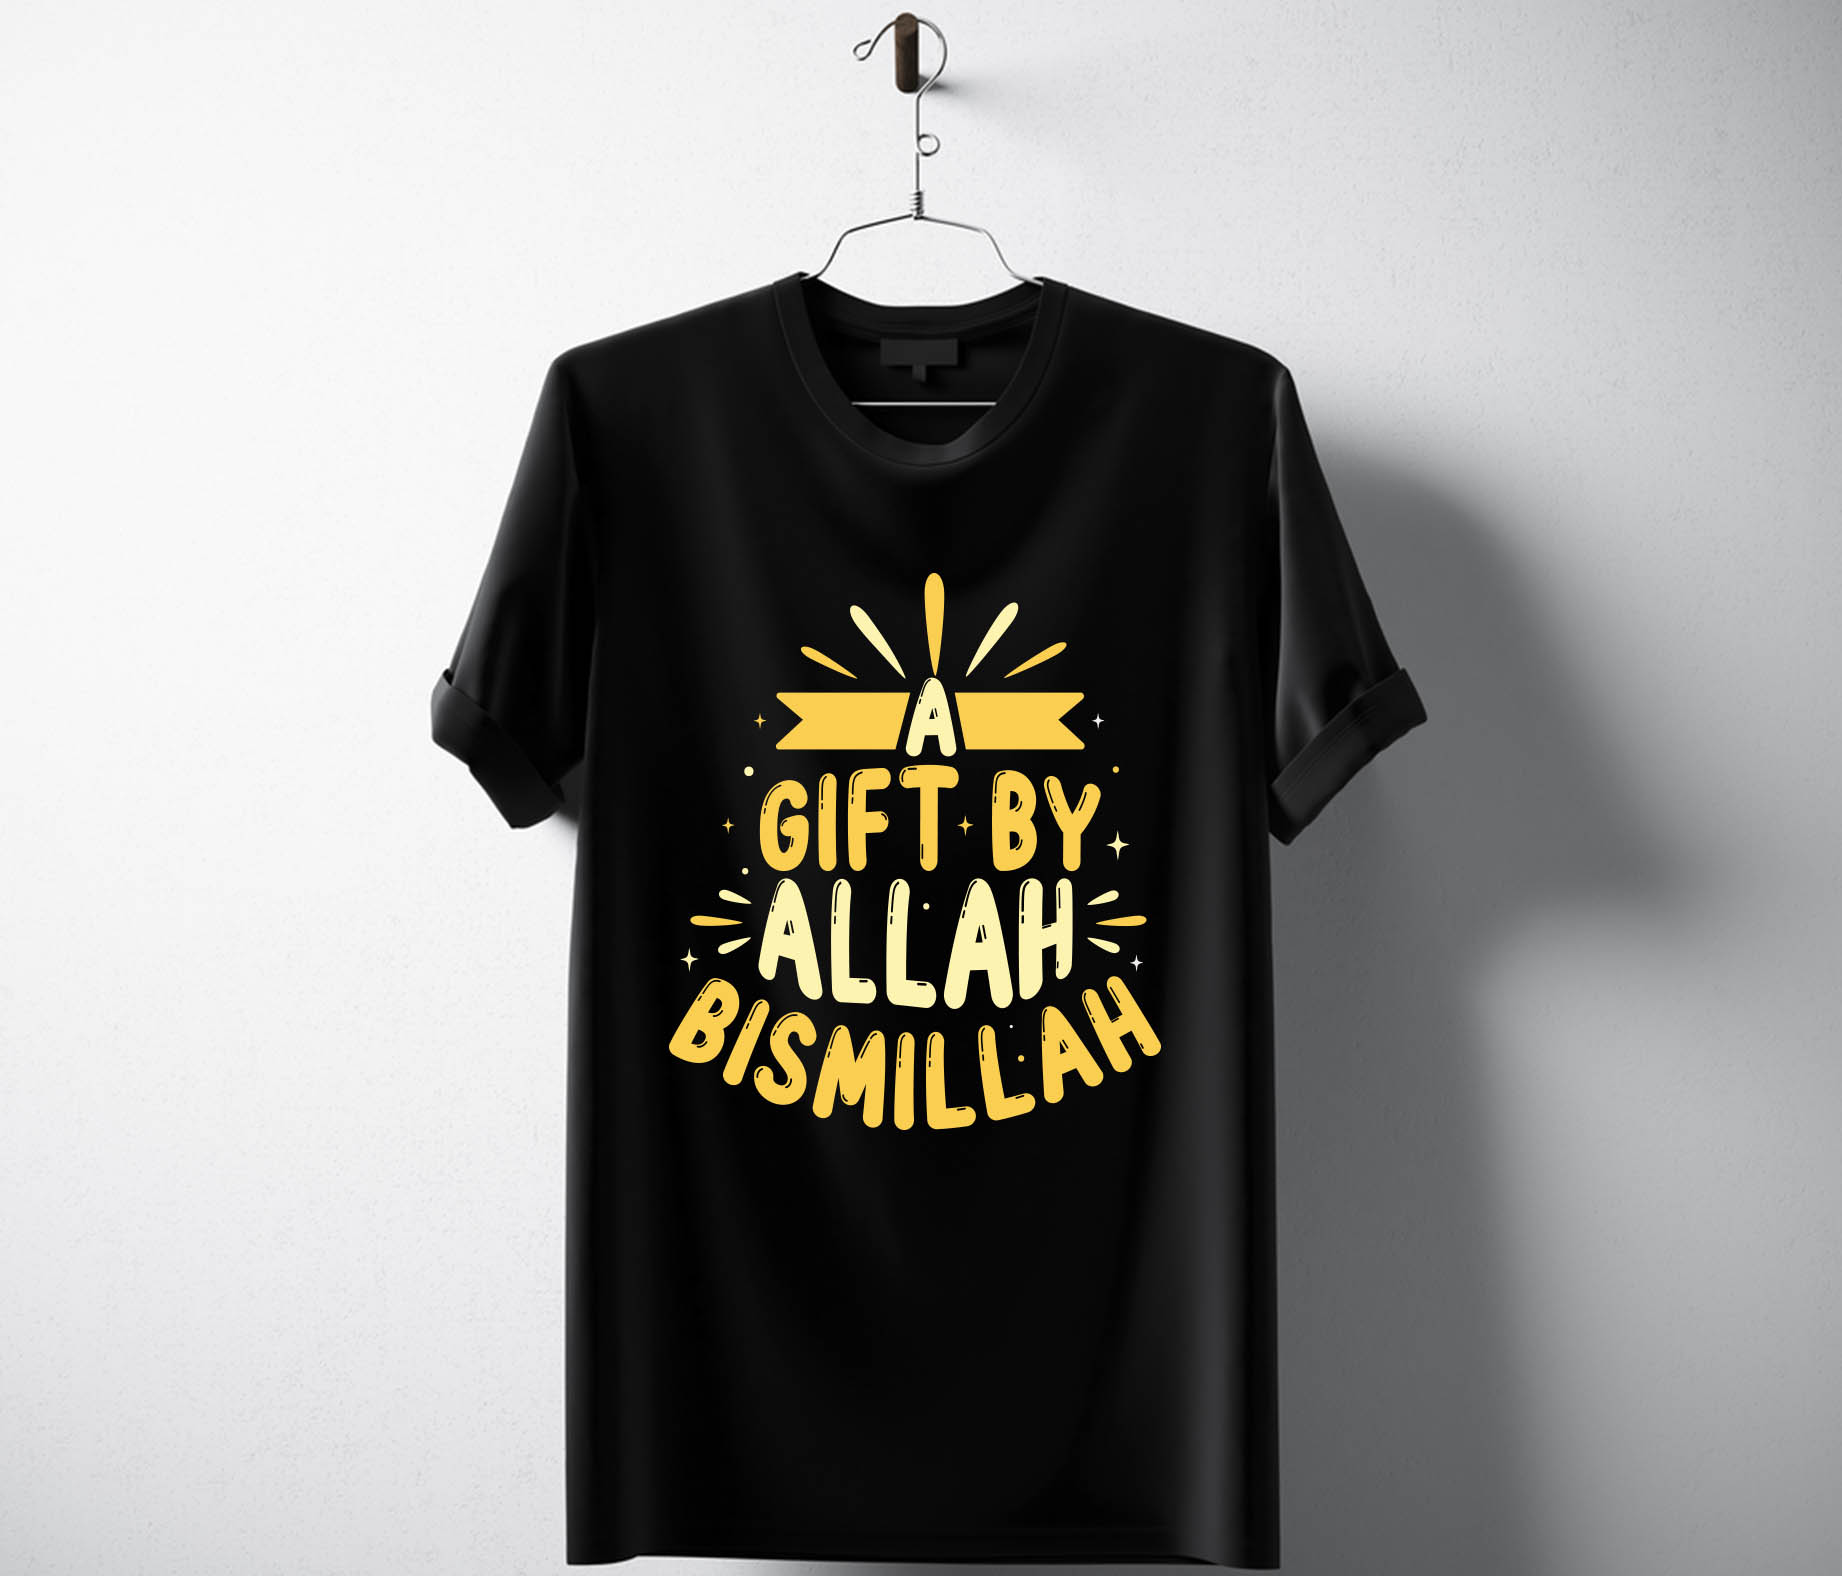 Black t - shirt with the words a gift by allah bismillah.